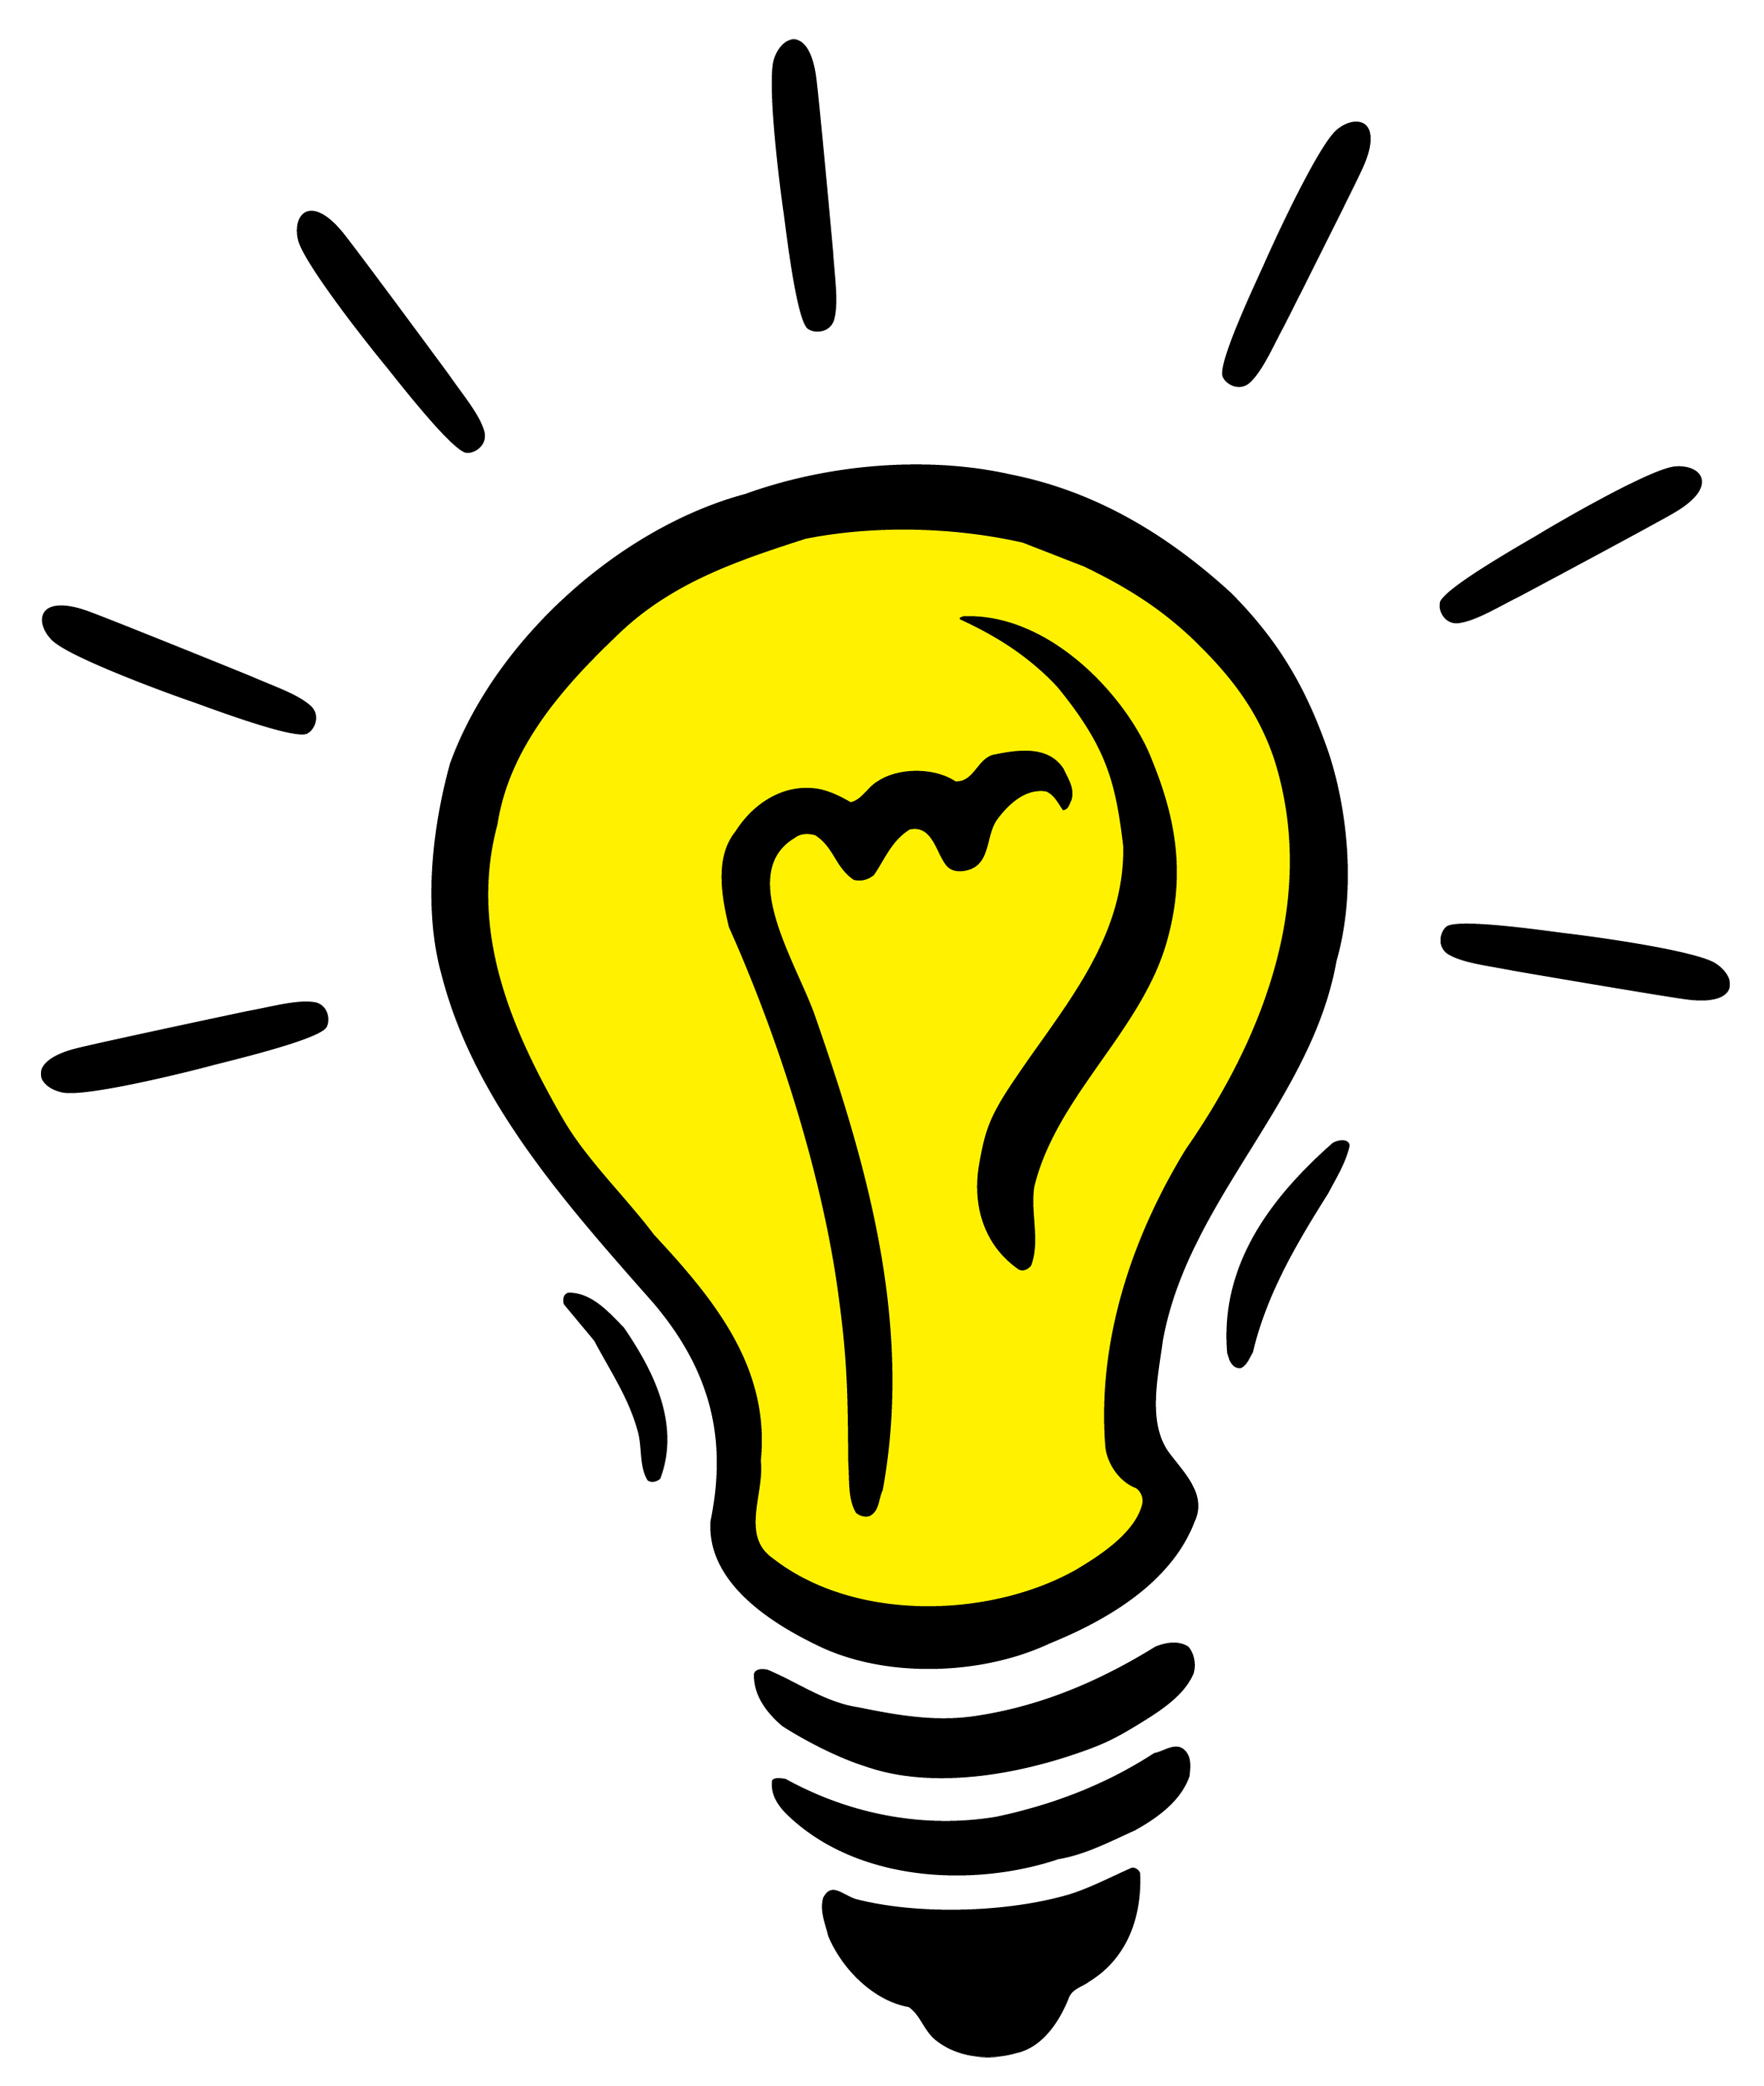 Introducing �The Light Bulb� from Citrix Education | Citrix Blogs